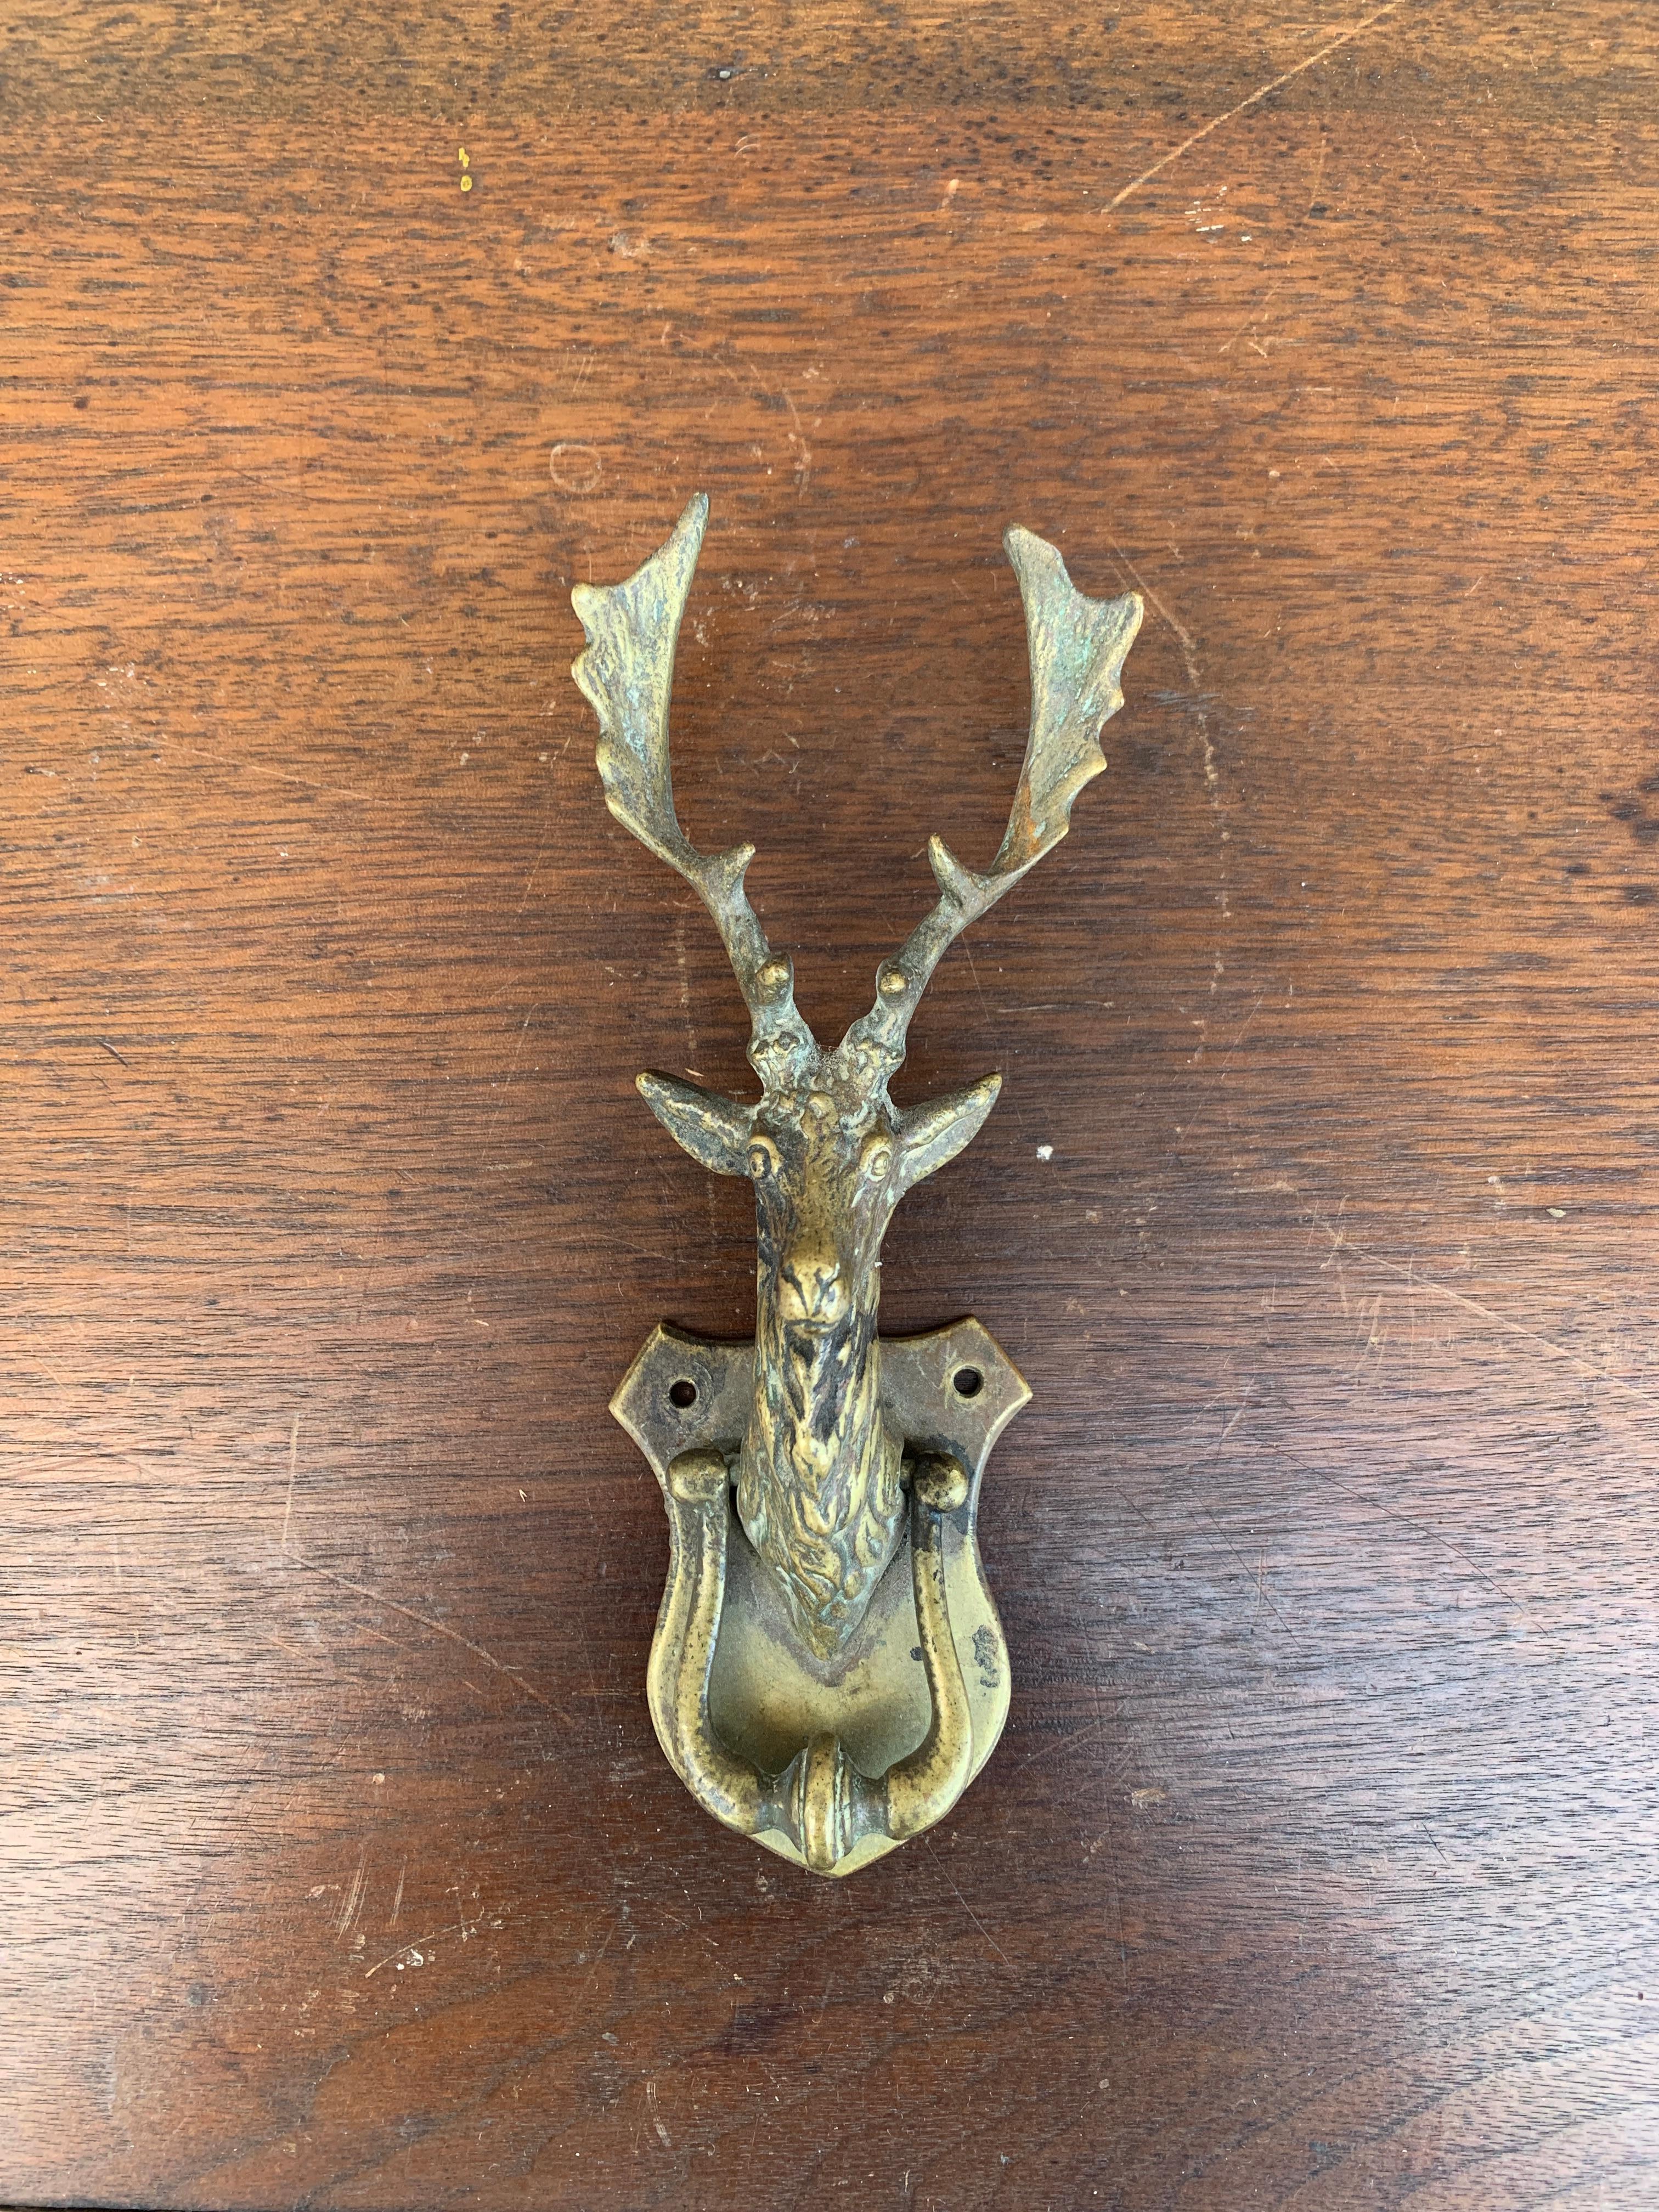 A gorgeous cast brass hunt themed stag or deer door knocker.

England, Circa 1940s

Measures: 2